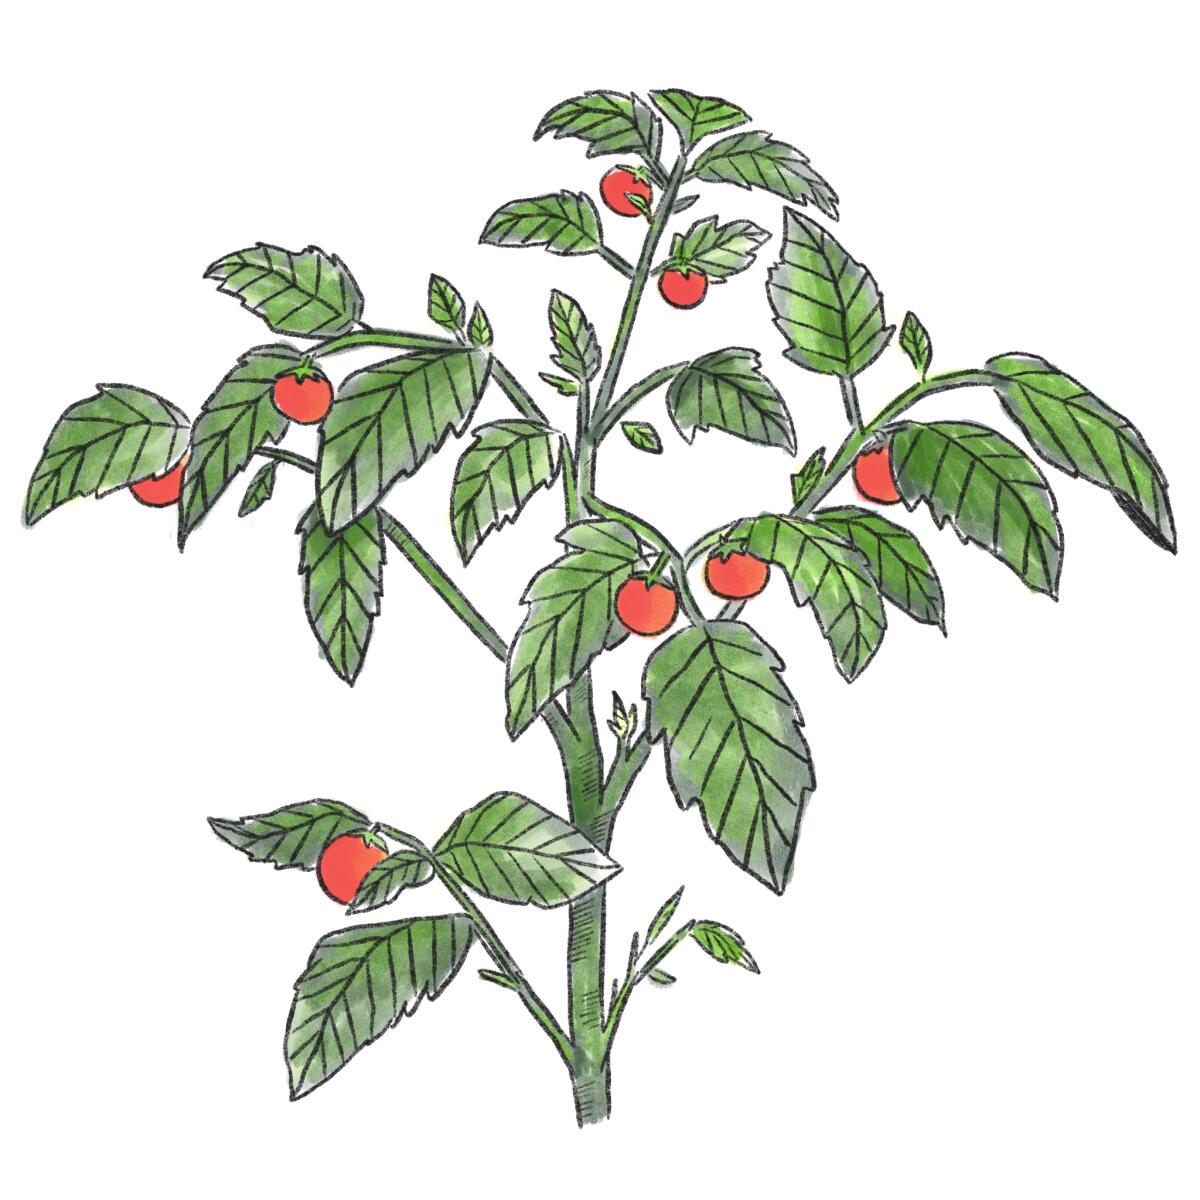 An illustration of a tomato plant